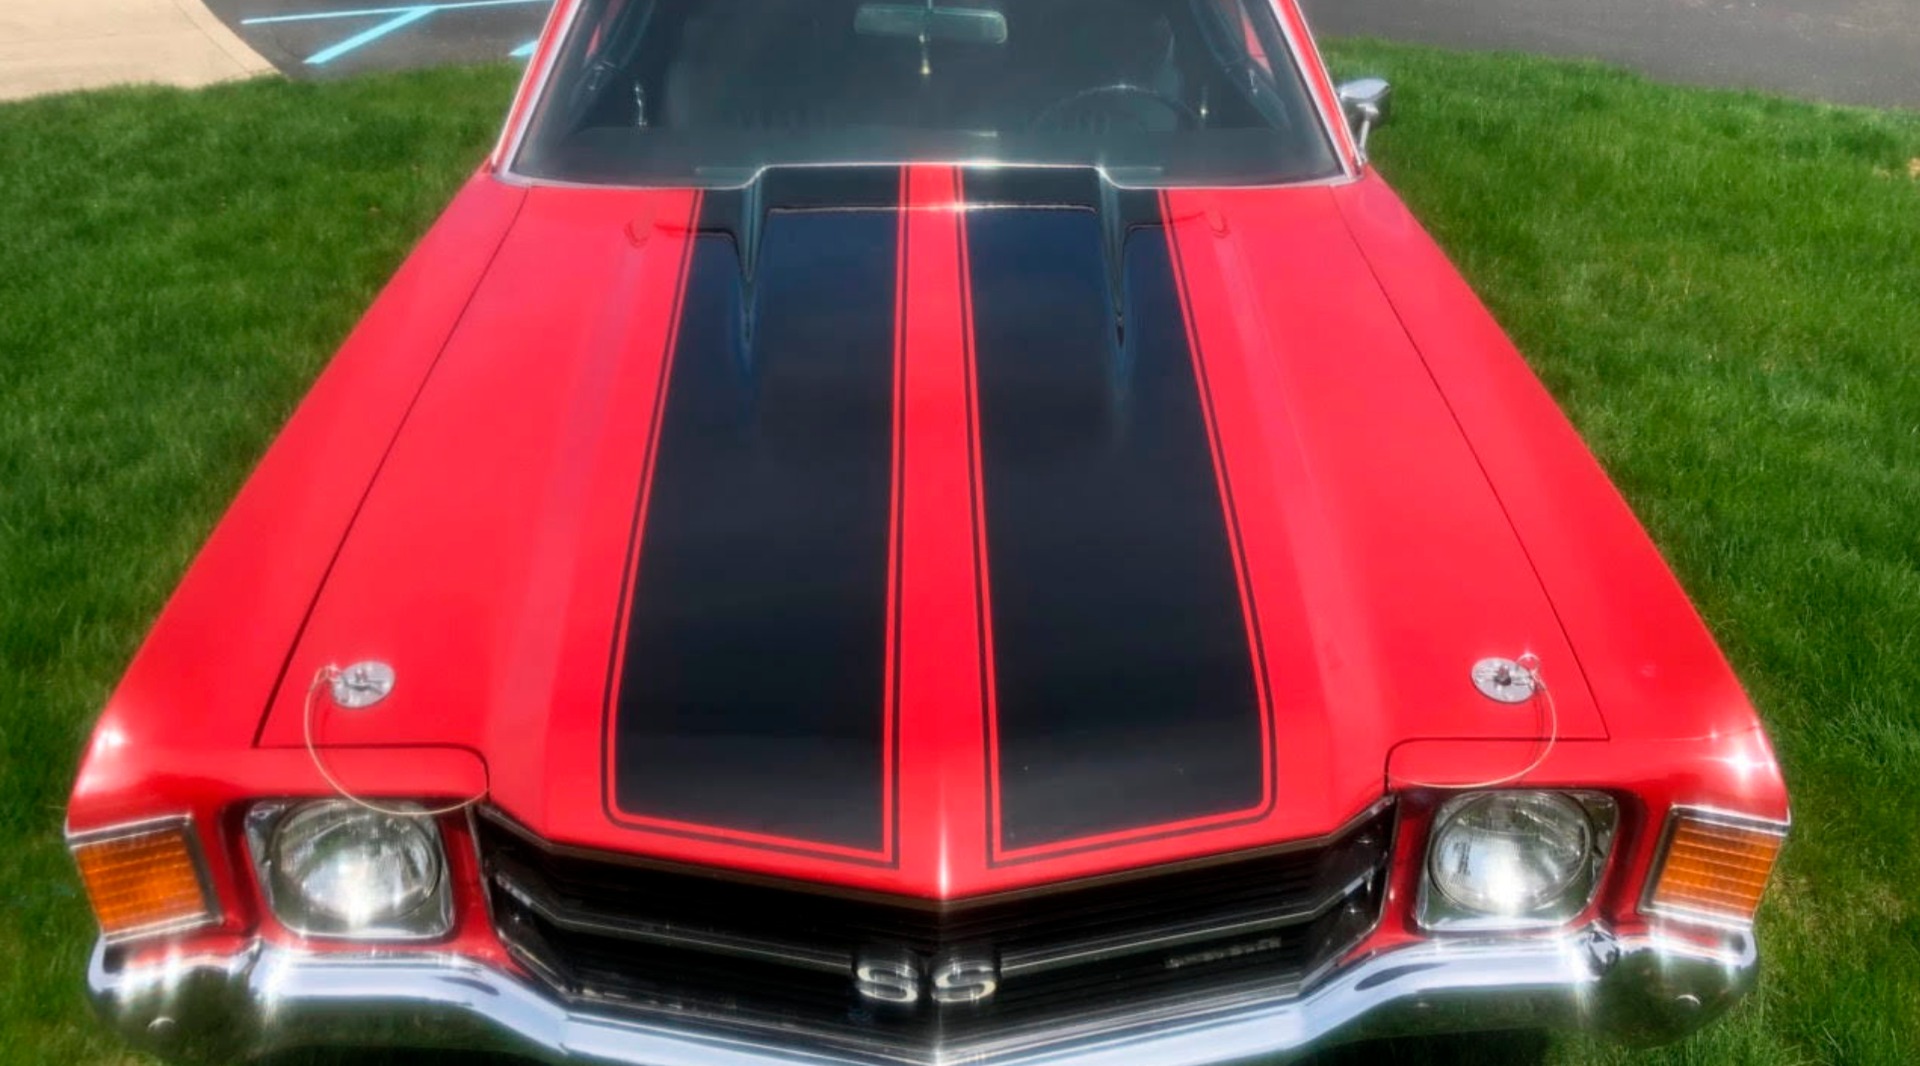 Used 1971 Chevrolet Chevelle -BIG BLOCK ORIGINAL BUILD SHEET-4 SPEED-PURE MUSCLE CAR- | Mundelein, IL